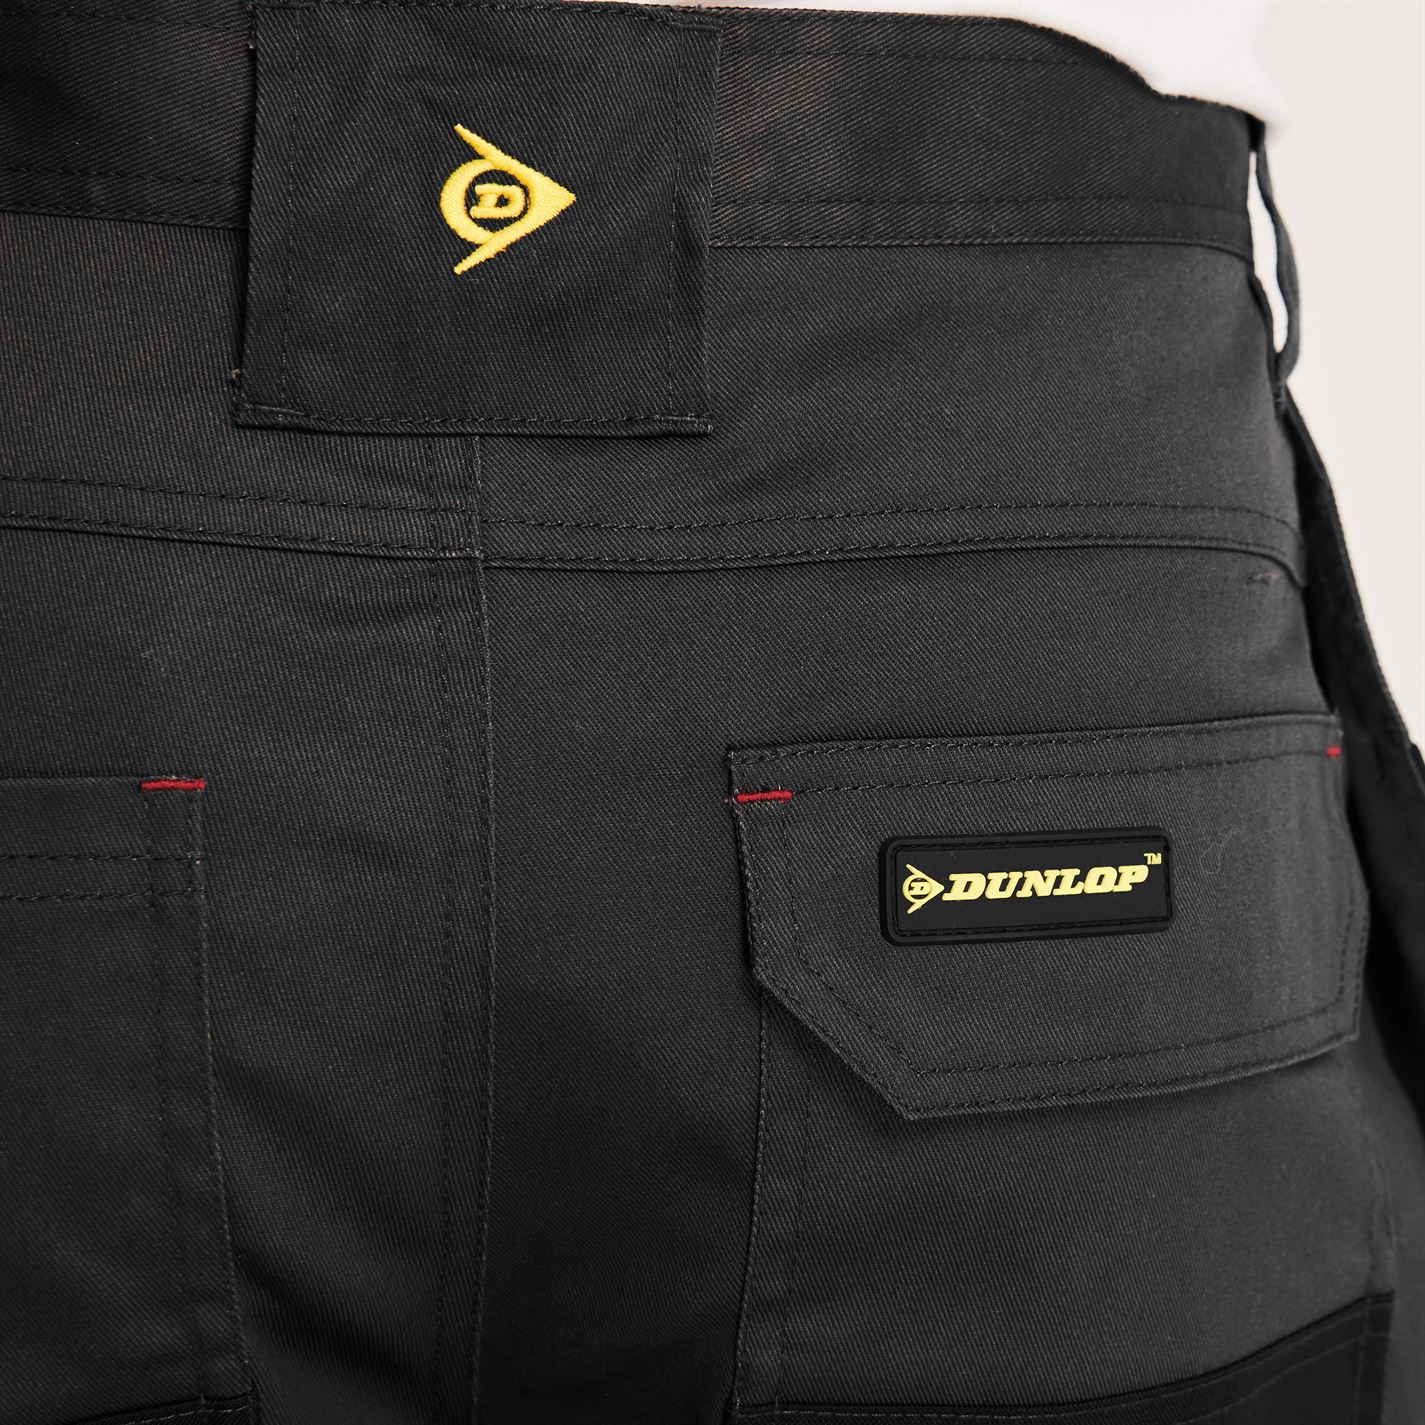 Dunlop On Site Trousers Mens | SportsDirect.com USA